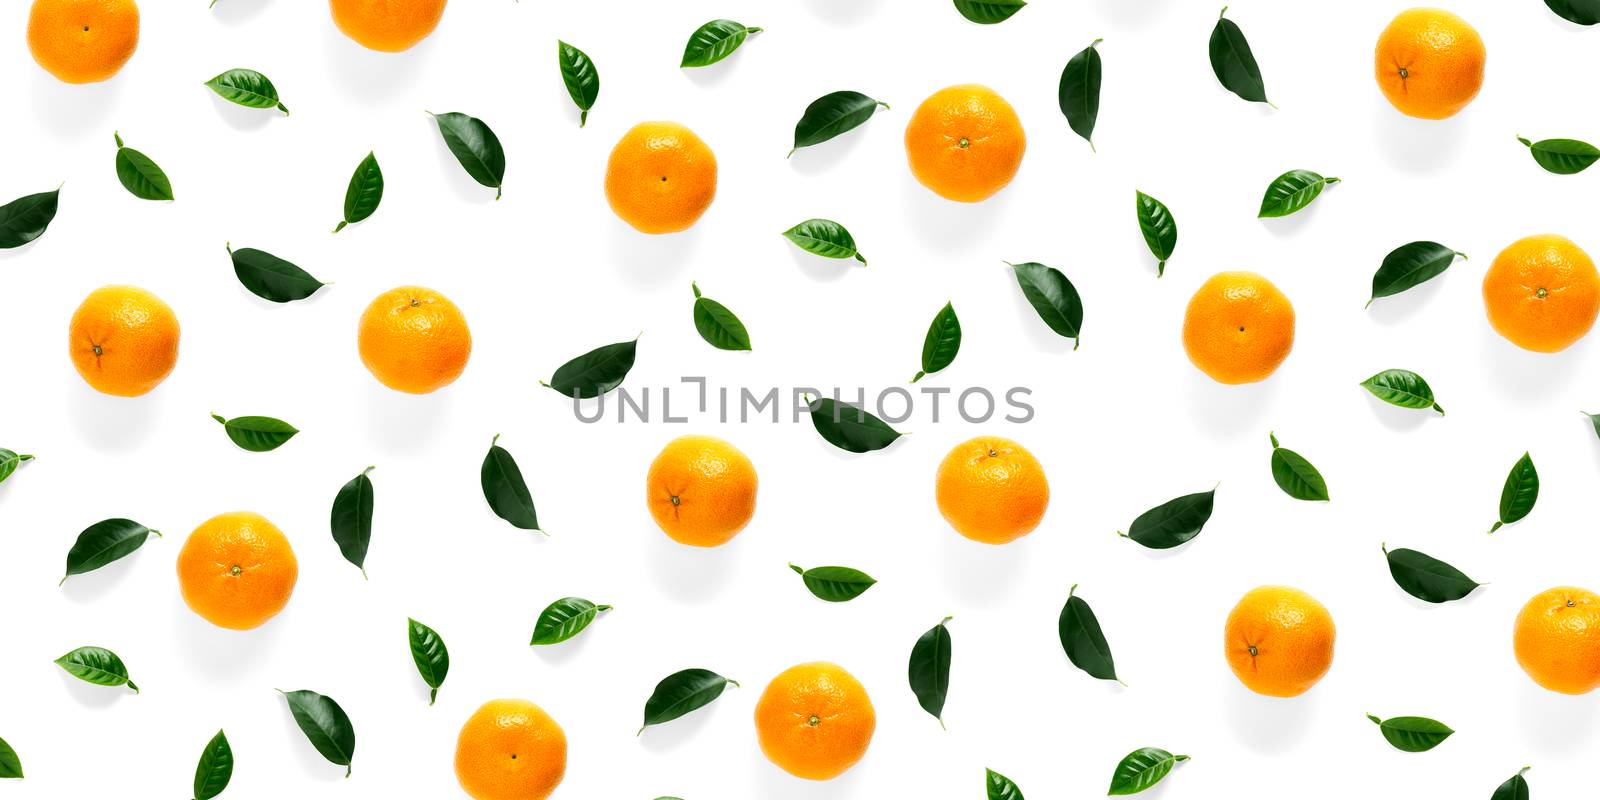 Isolated tangerine citrus collection background with leaves. Whole tangerines or mandarin orange fruits isolated on white background. mandarine orange background not pattern